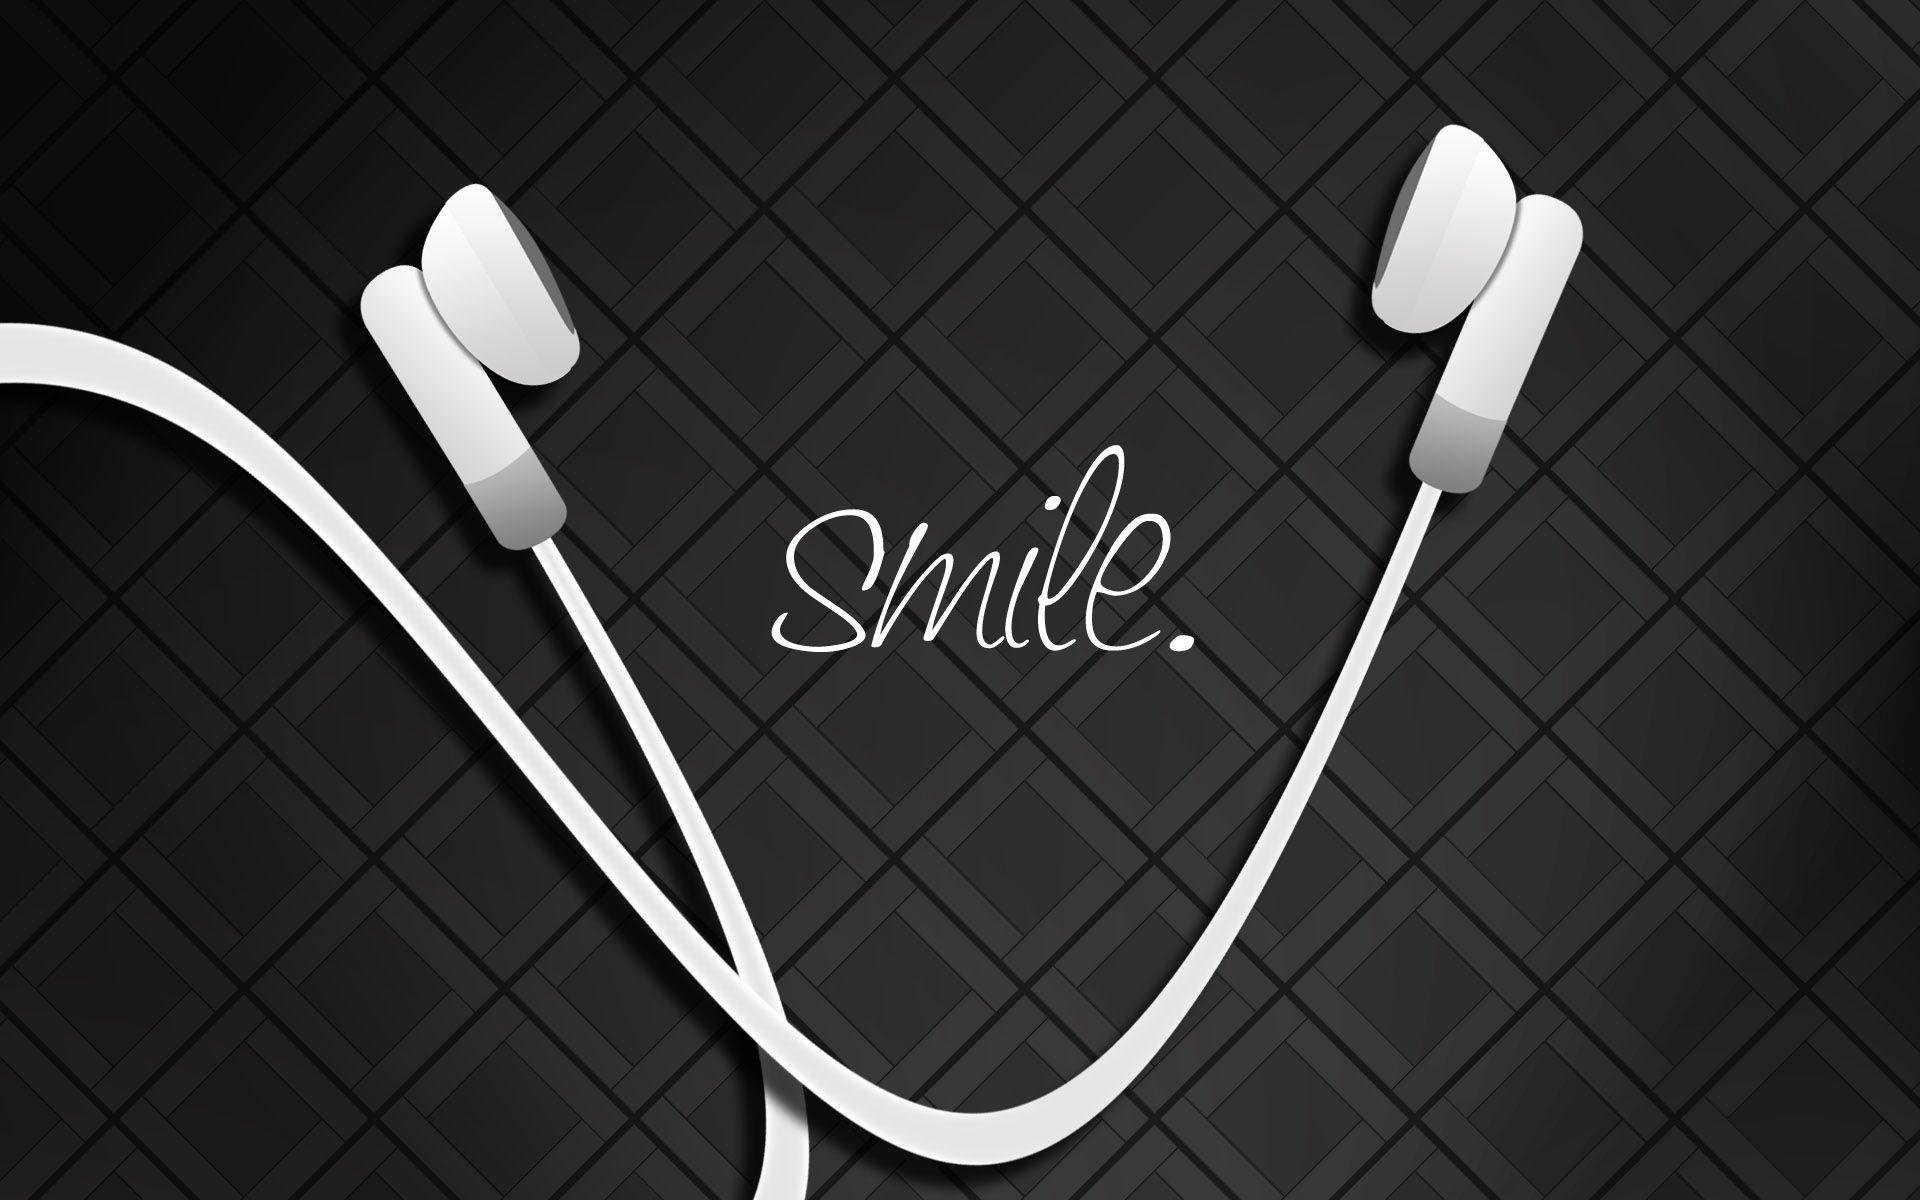 Black Smile Wallpapers - Top Free Black Smile Backgrounds - Wallpaperaccess